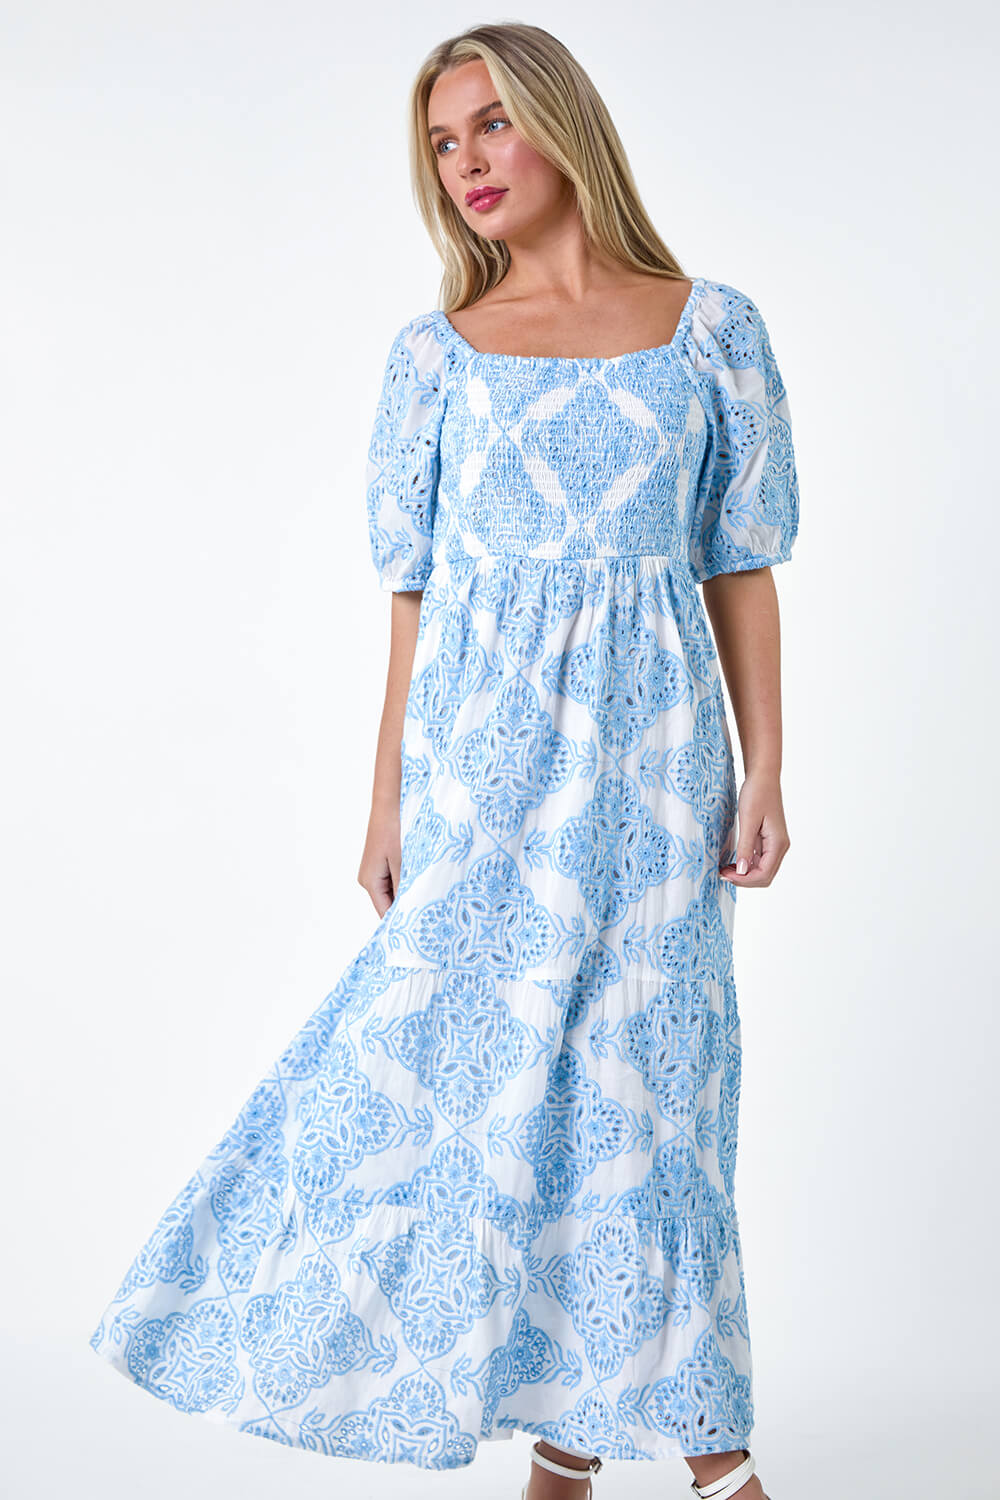 Blue Petite Cotton Embroidered Shirred Maxi Dress, Image 4 of 5